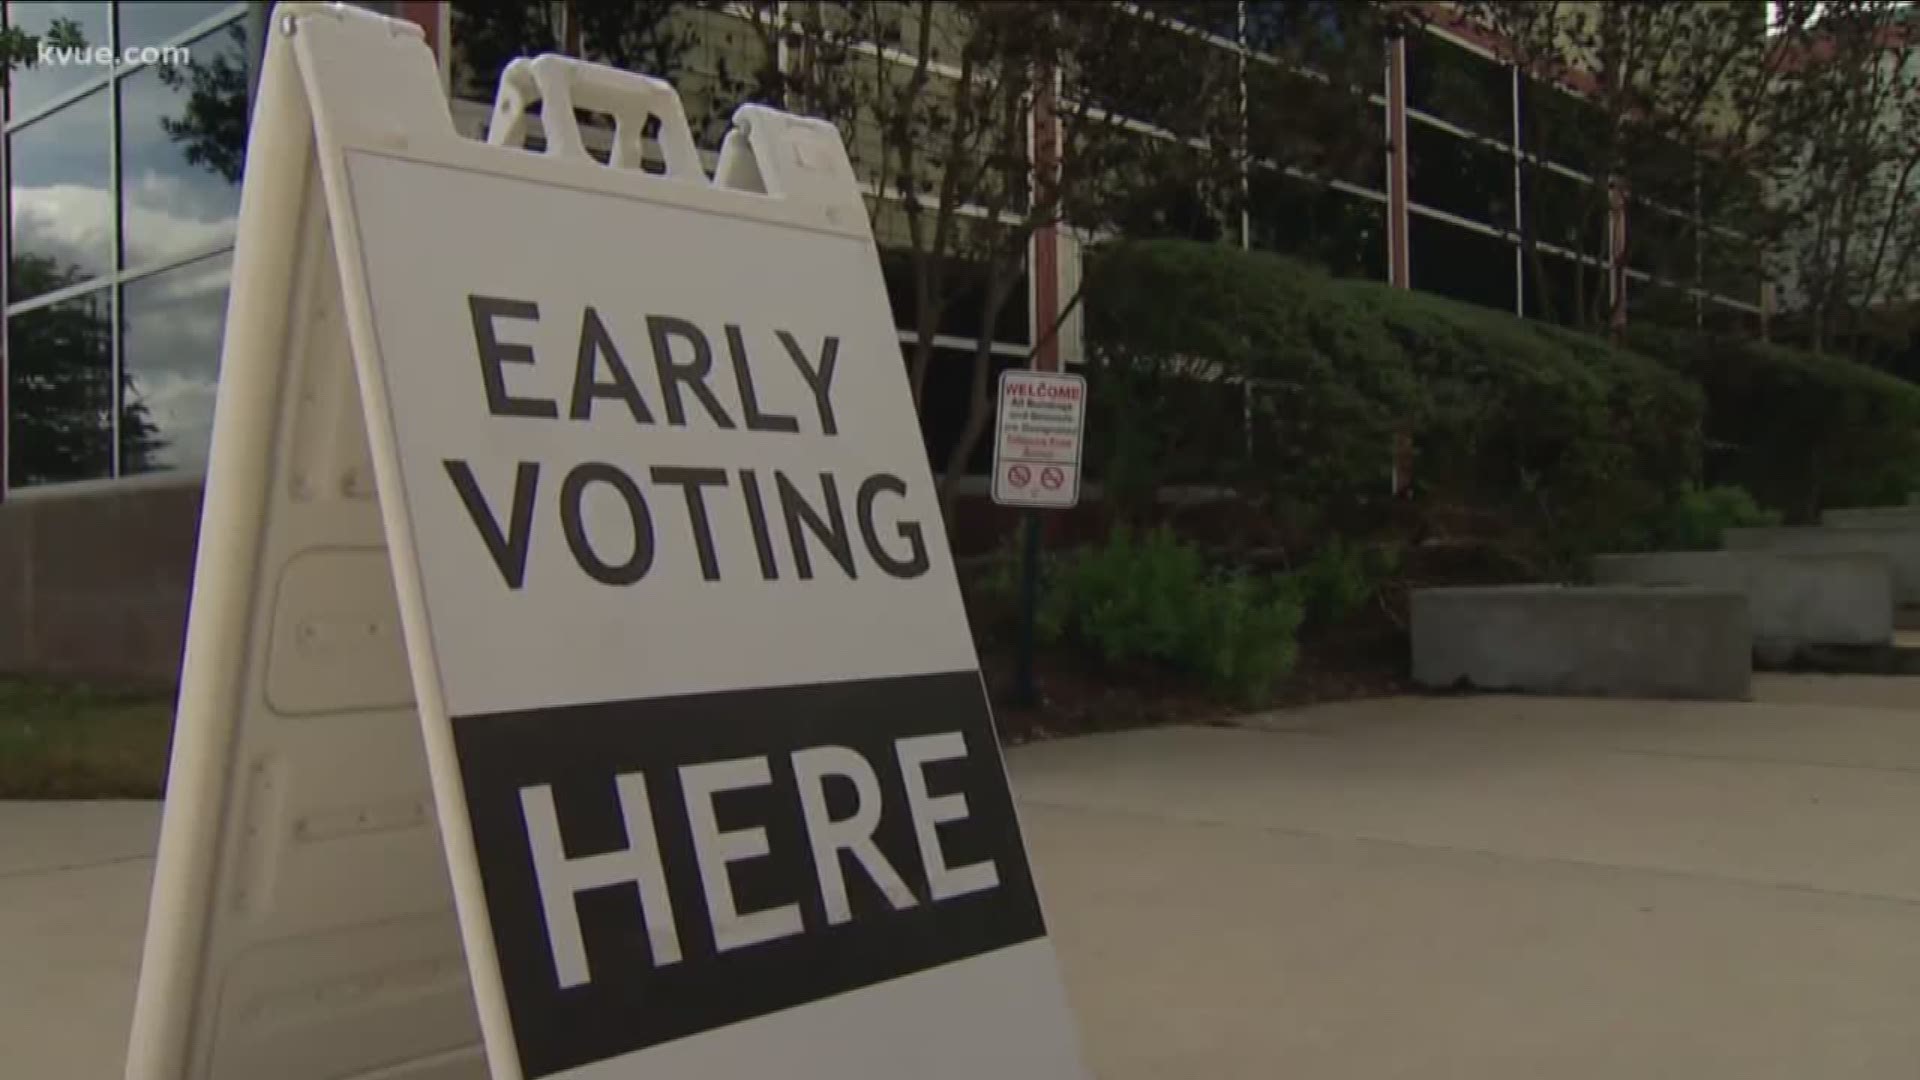 Need a ride to the polls on Election Day? There are several options in the Austin area.